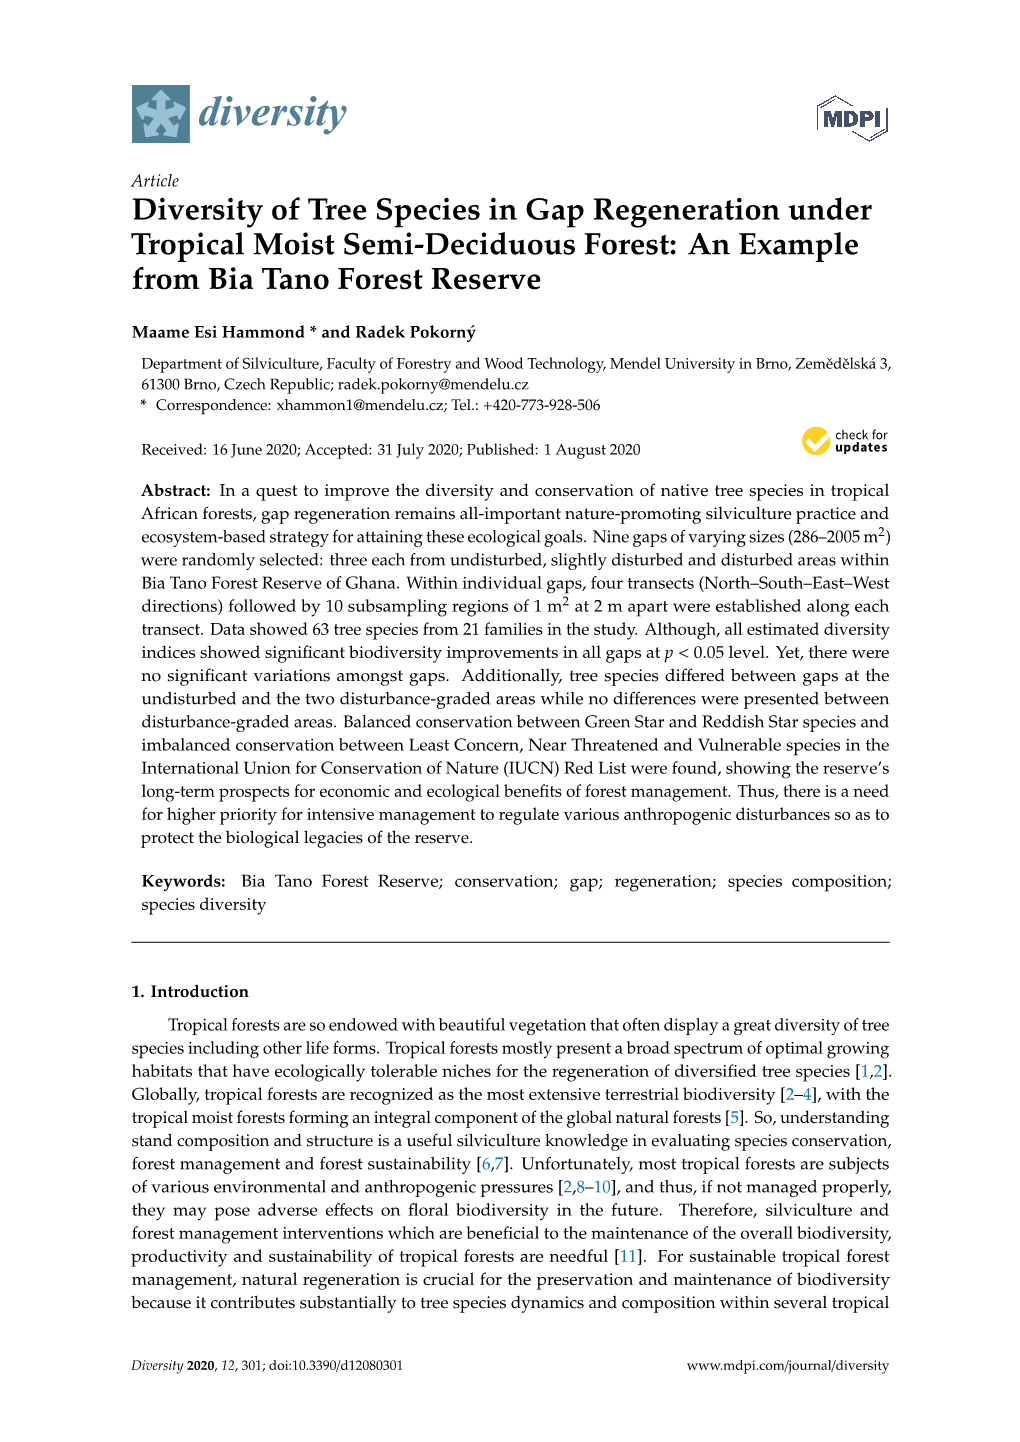 Diversity of Tree Species in Gap Regeneration Under Tropical Moist Semi-Deciduous Forest: an Example from Bia Tano Forest Reserve